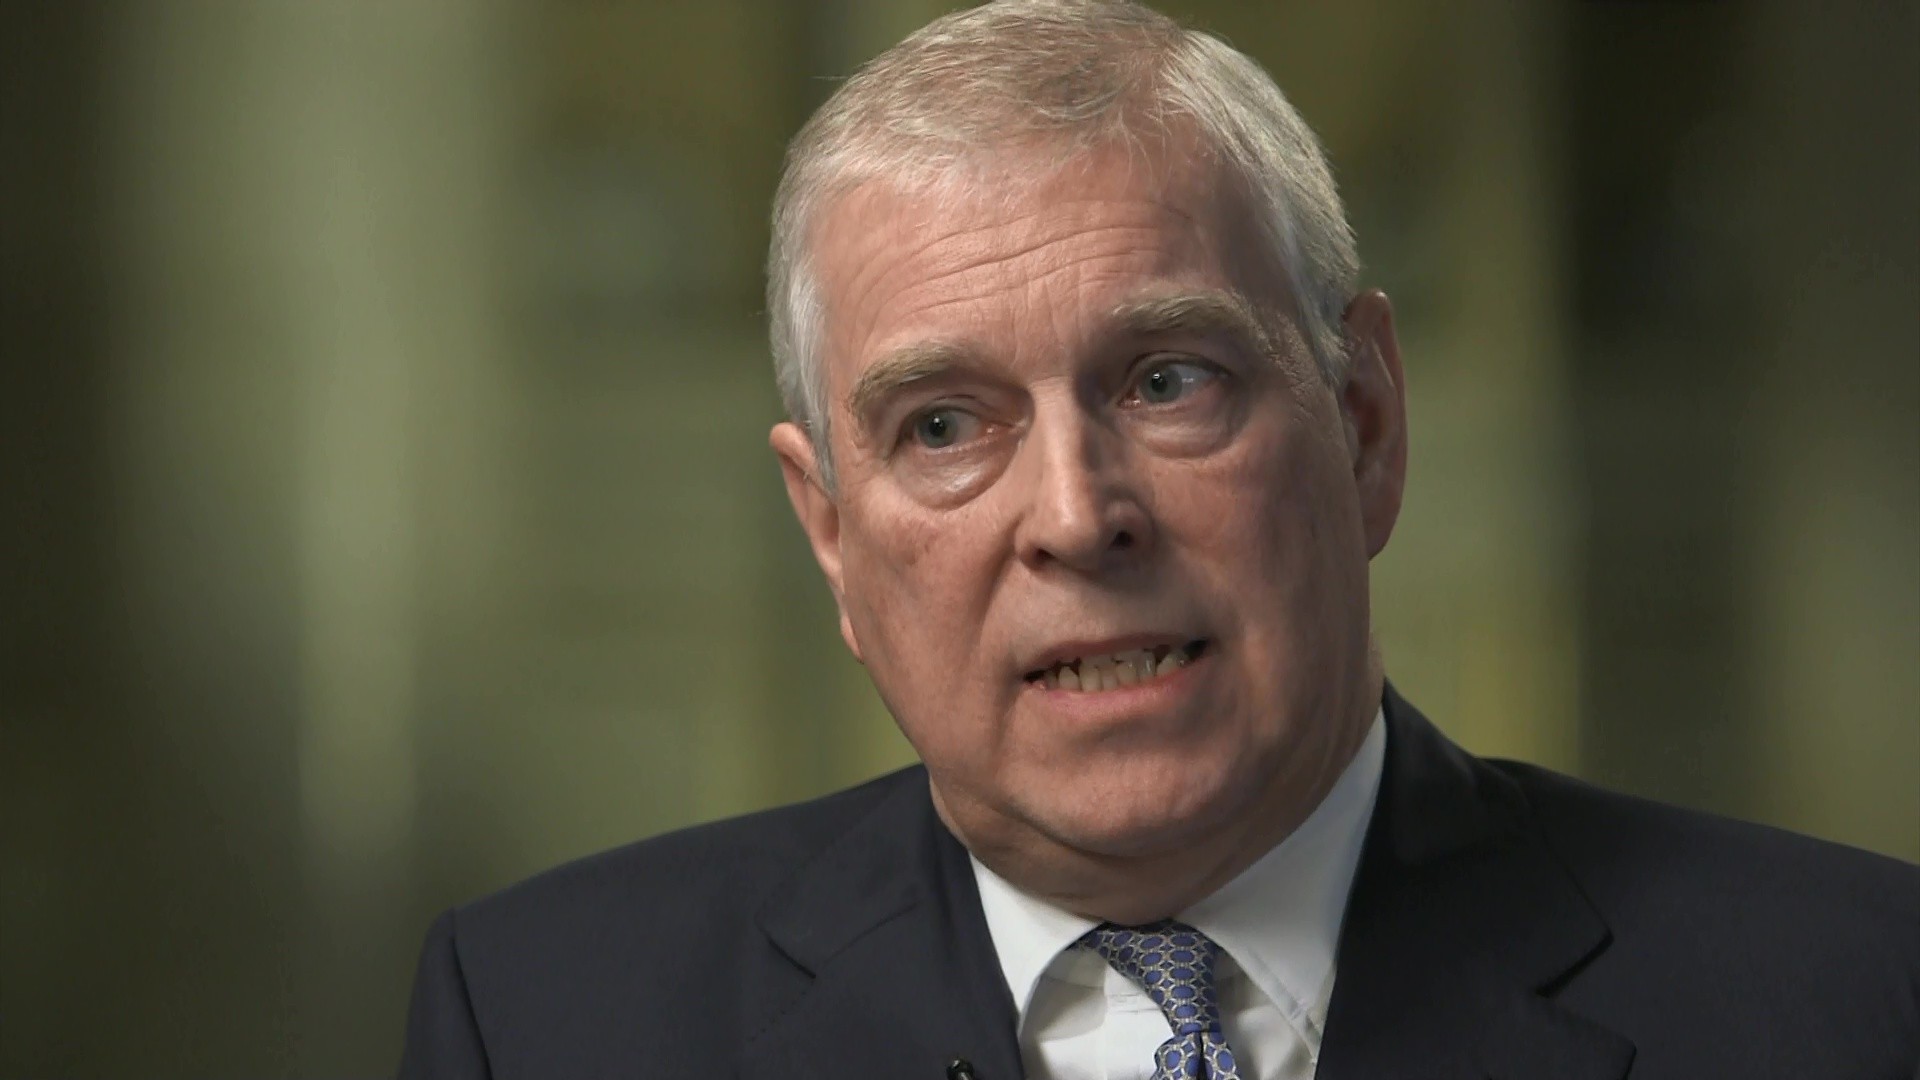 Prince Andrew faced a backlash after his BBC interview about Jeffrey Epstein